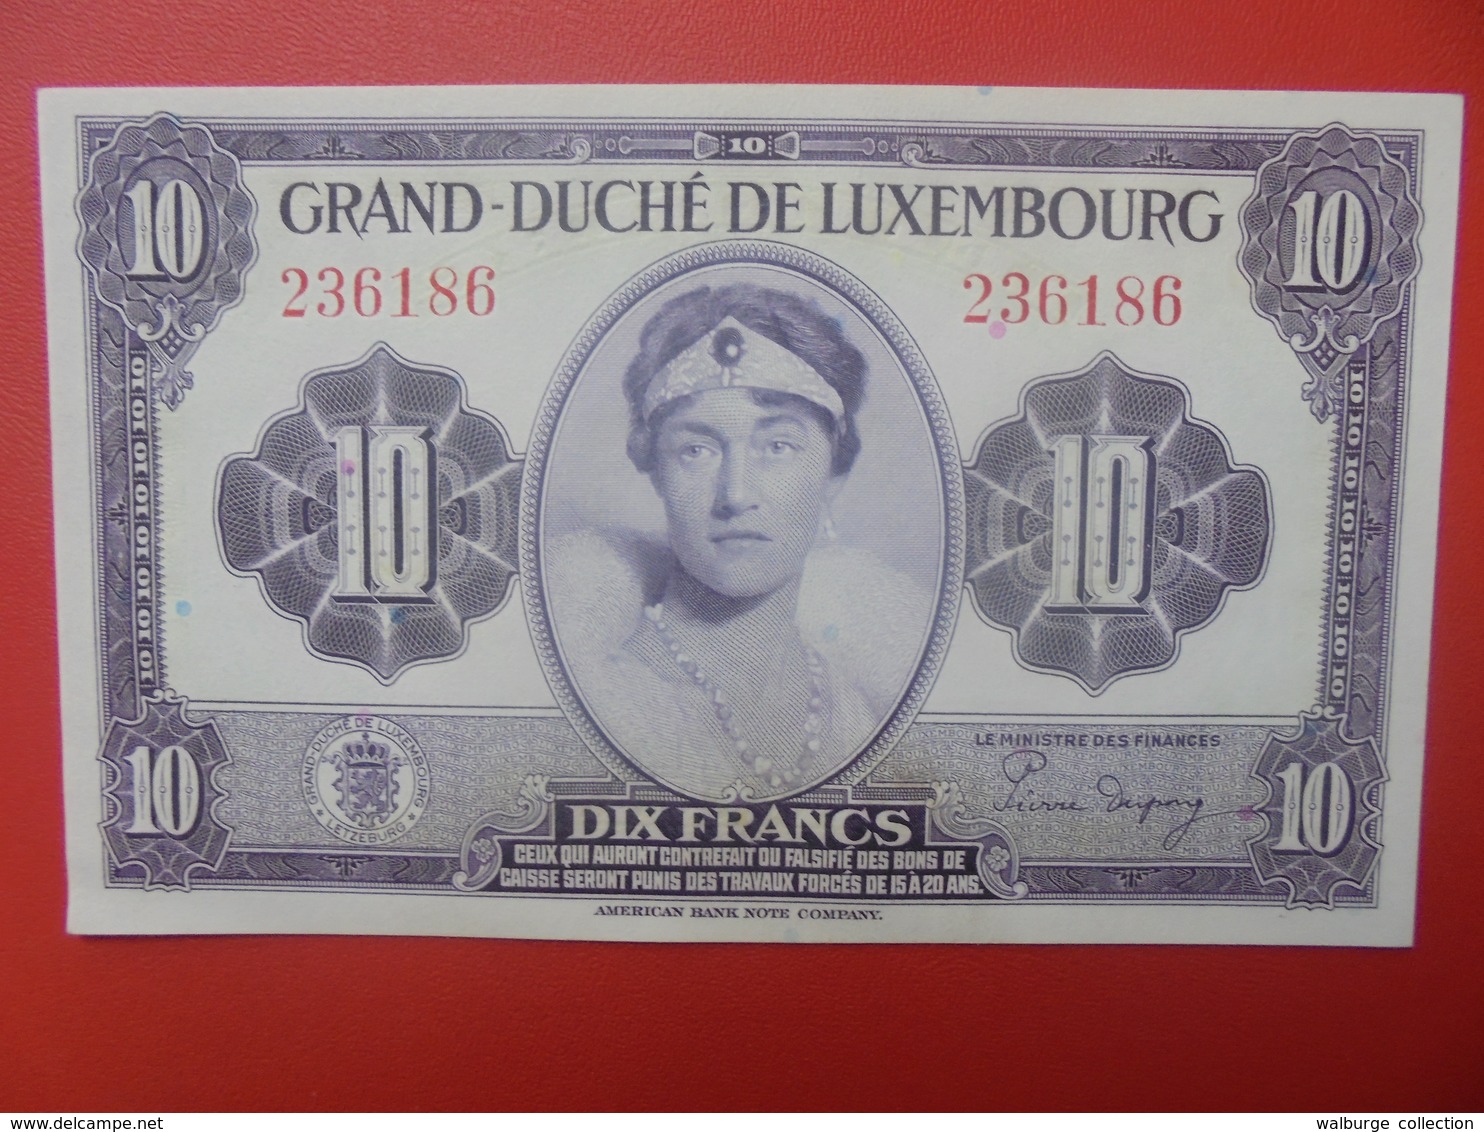 LUXEMBOURG 10 FRANCS (NON-DATE) 1944 PEU CIRCULER/NEUF (F.1) - Luxembourg